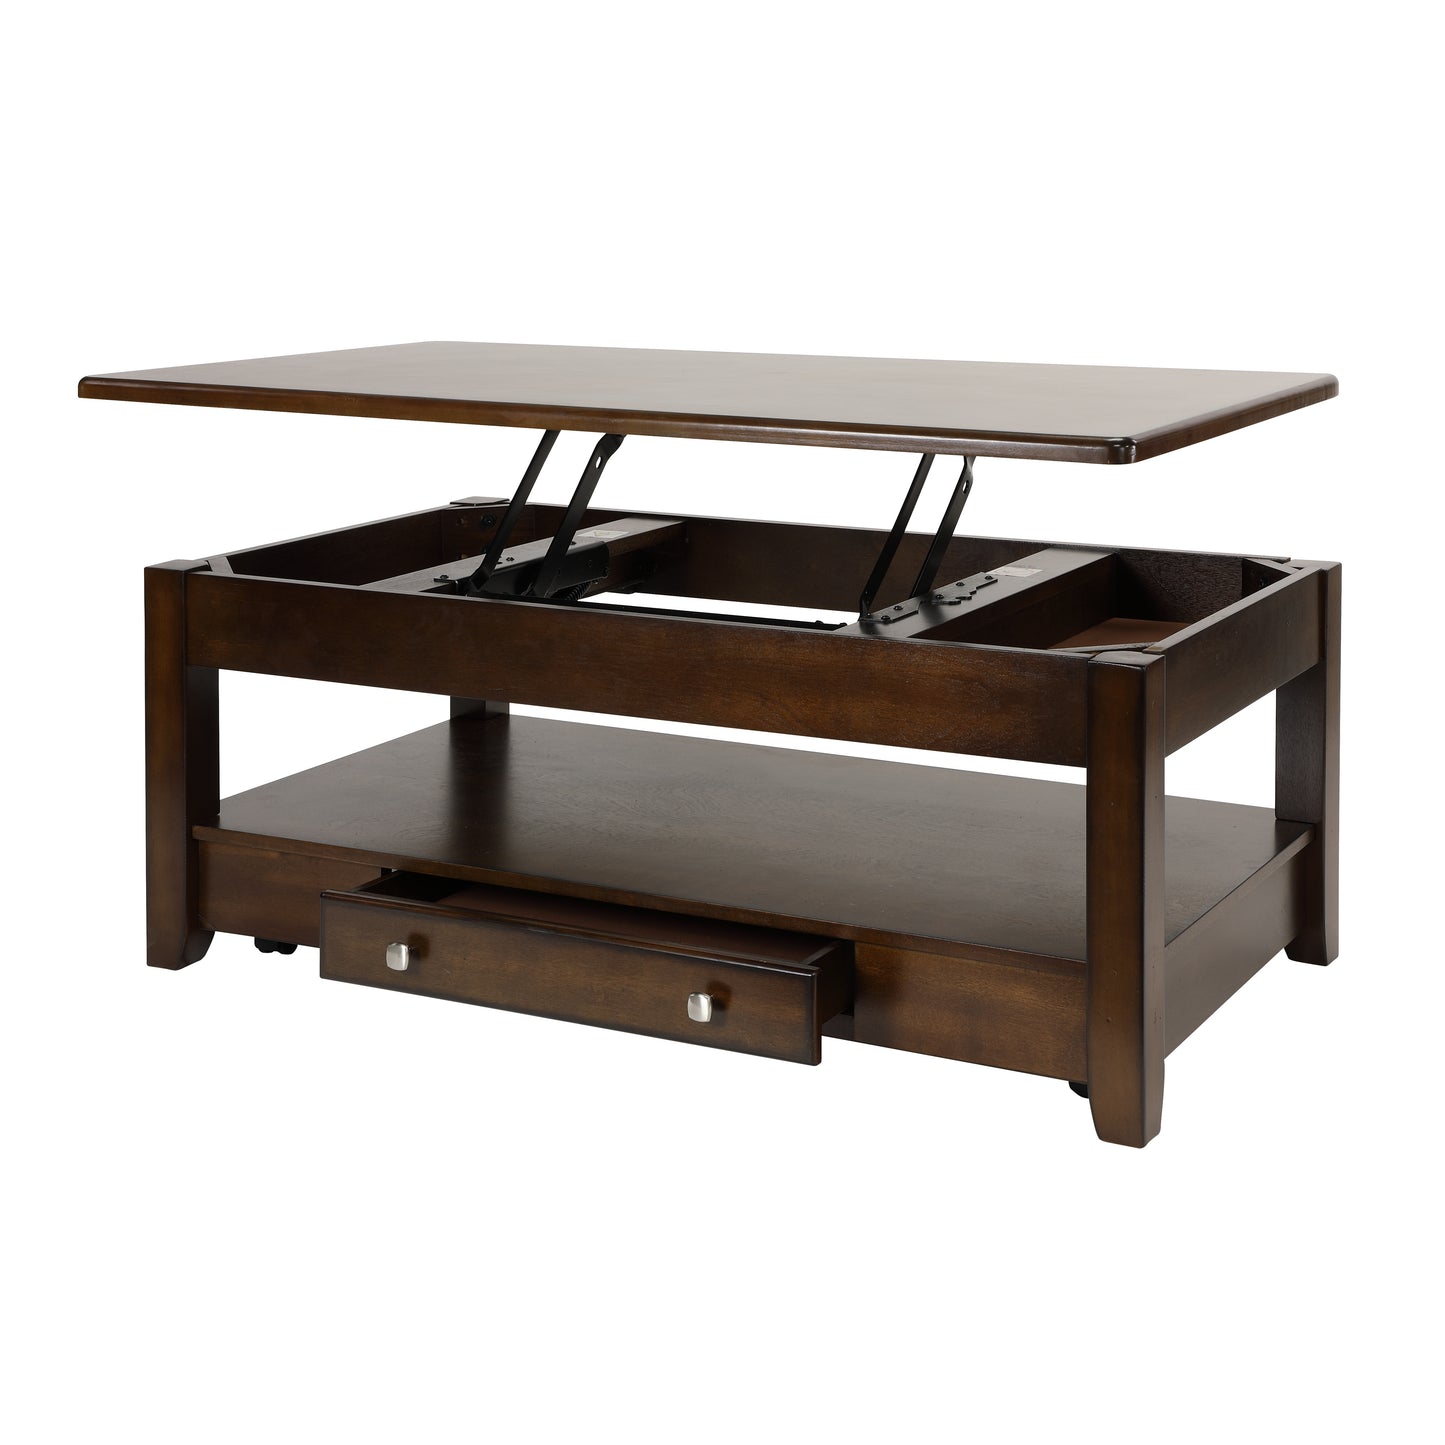 Ballwin Lift Top Coffee Table CHERRY ONLY